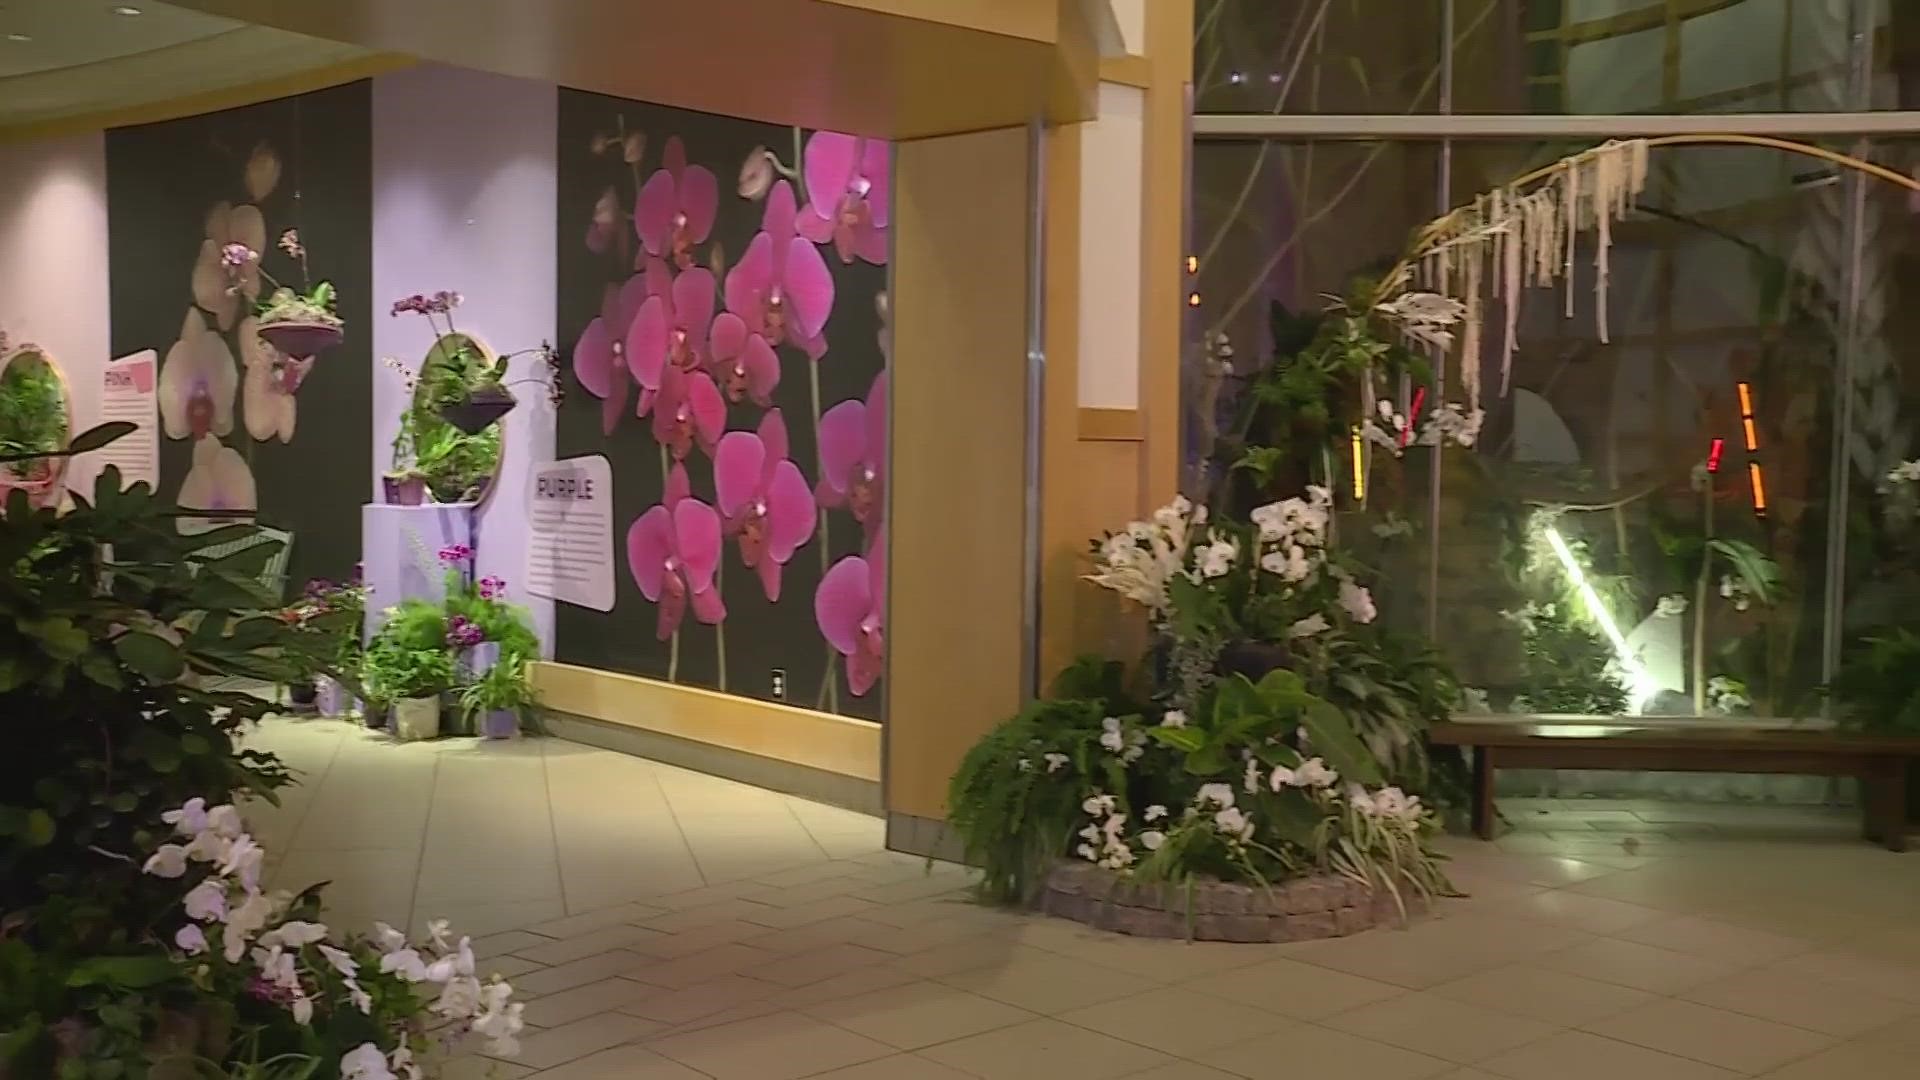 The Cleveland Botanical Garden has over 100 different types of orchids and 3000 flowers at Orchids Forever.